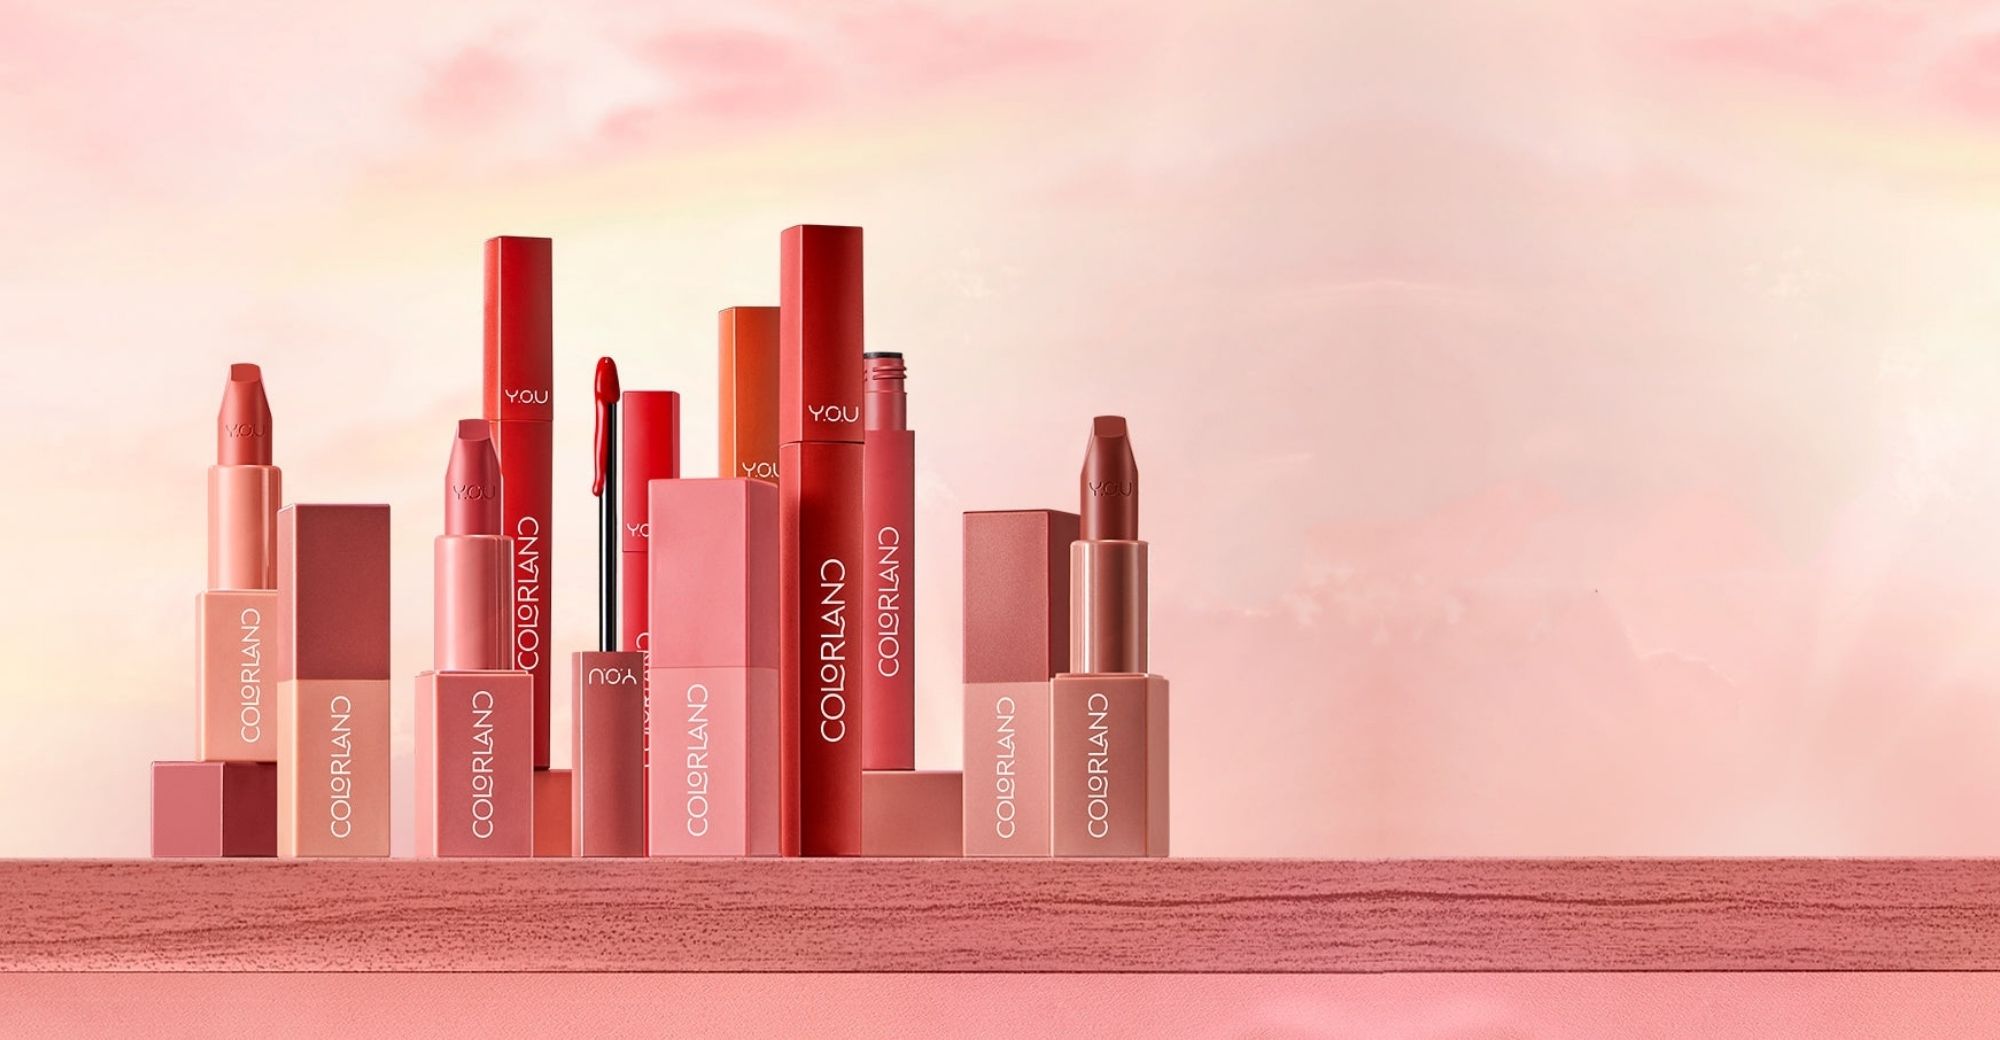 Southeast Asian Makeup Brand Y.O.U Secures $40M in Round-C Financing